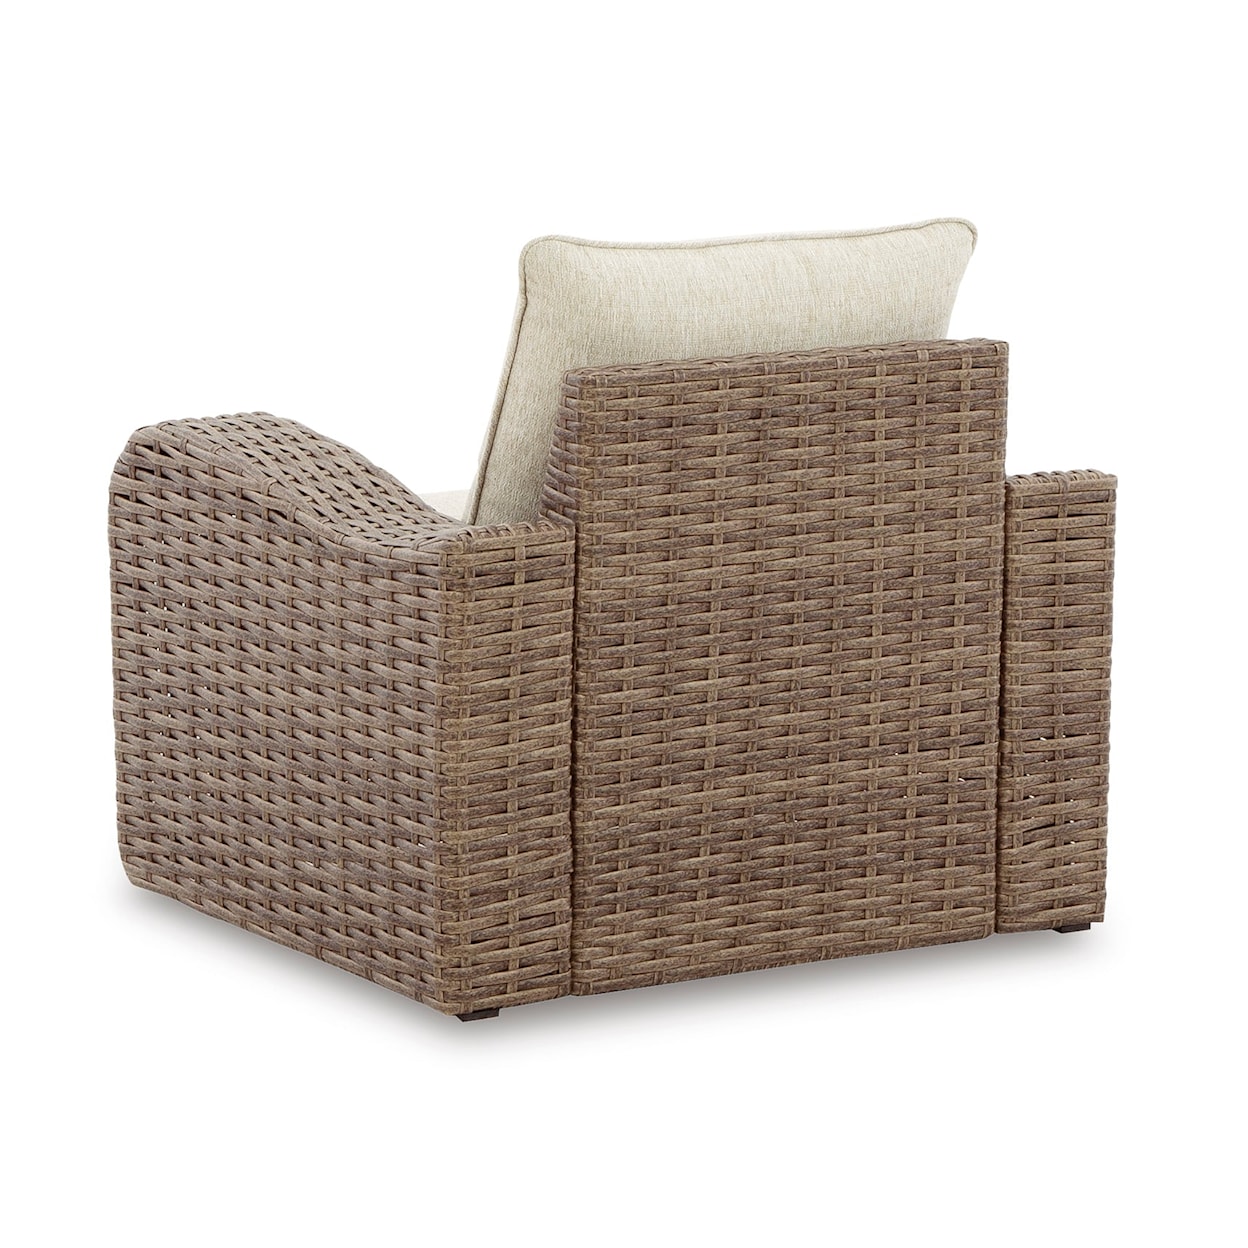 Benchcraft Sandy Bloom Outdoor Lounge Chair with Cushion